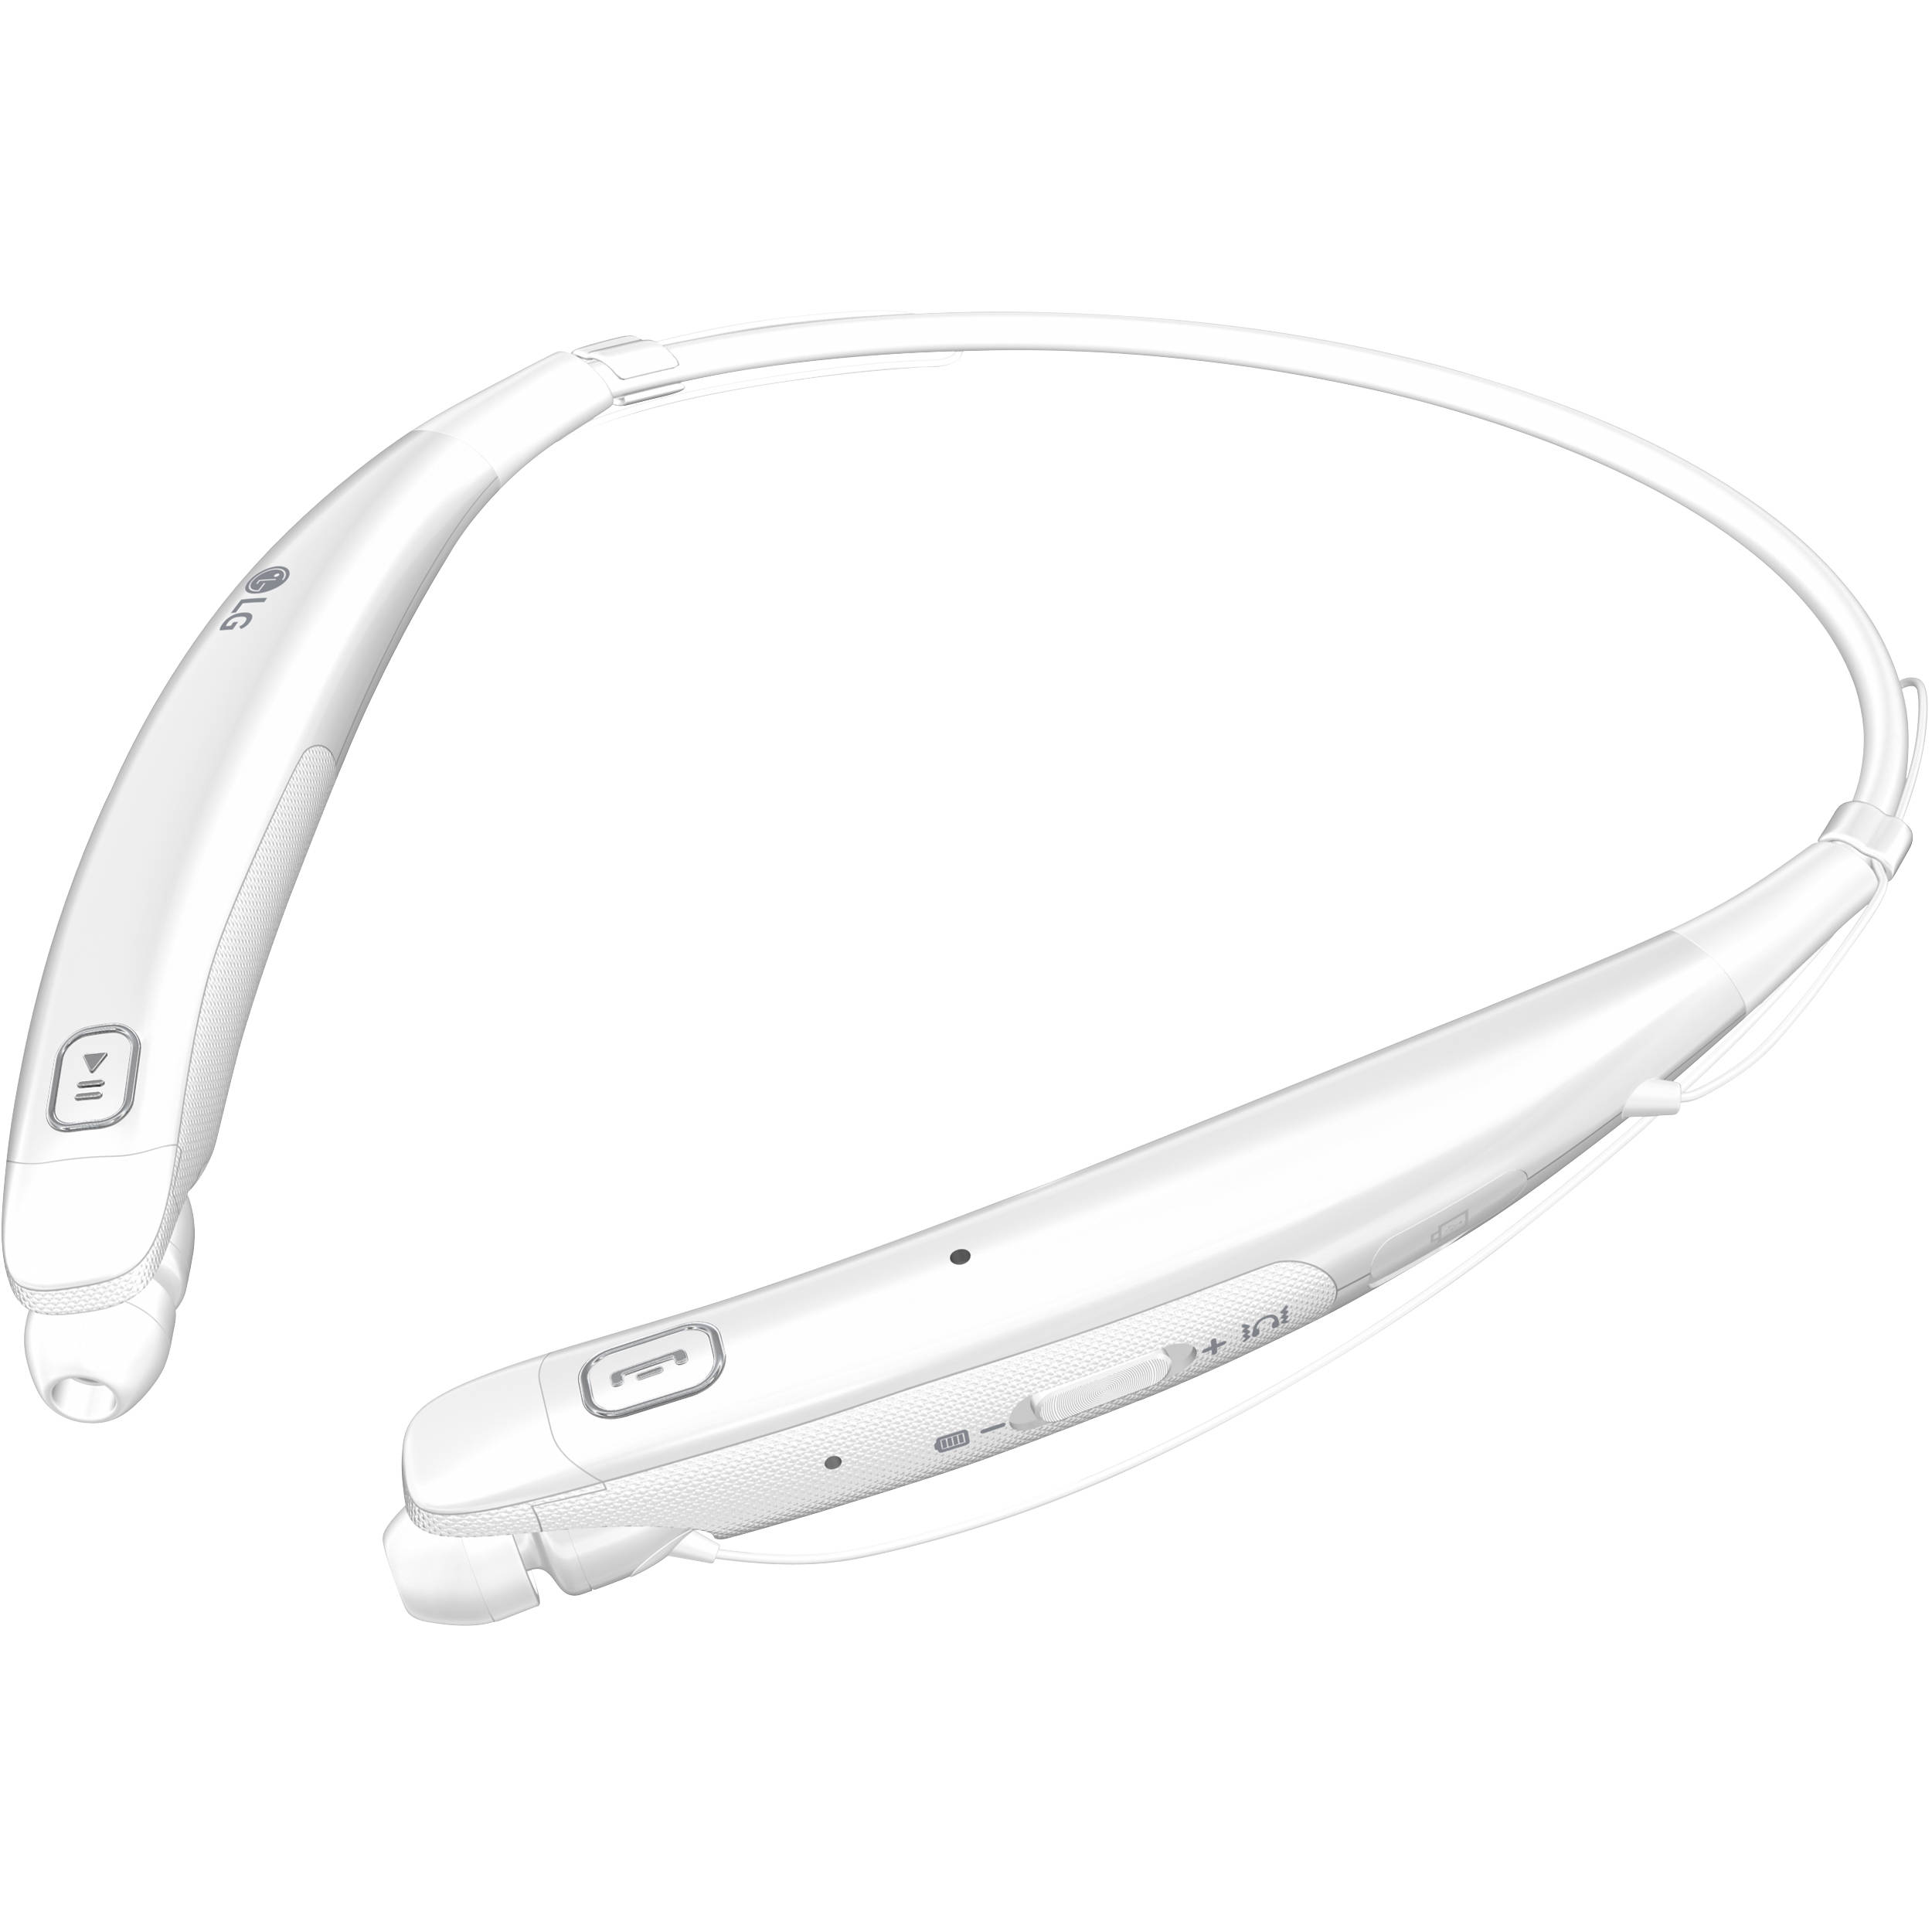 Lg stereo headset hbs 770 how to user manual free